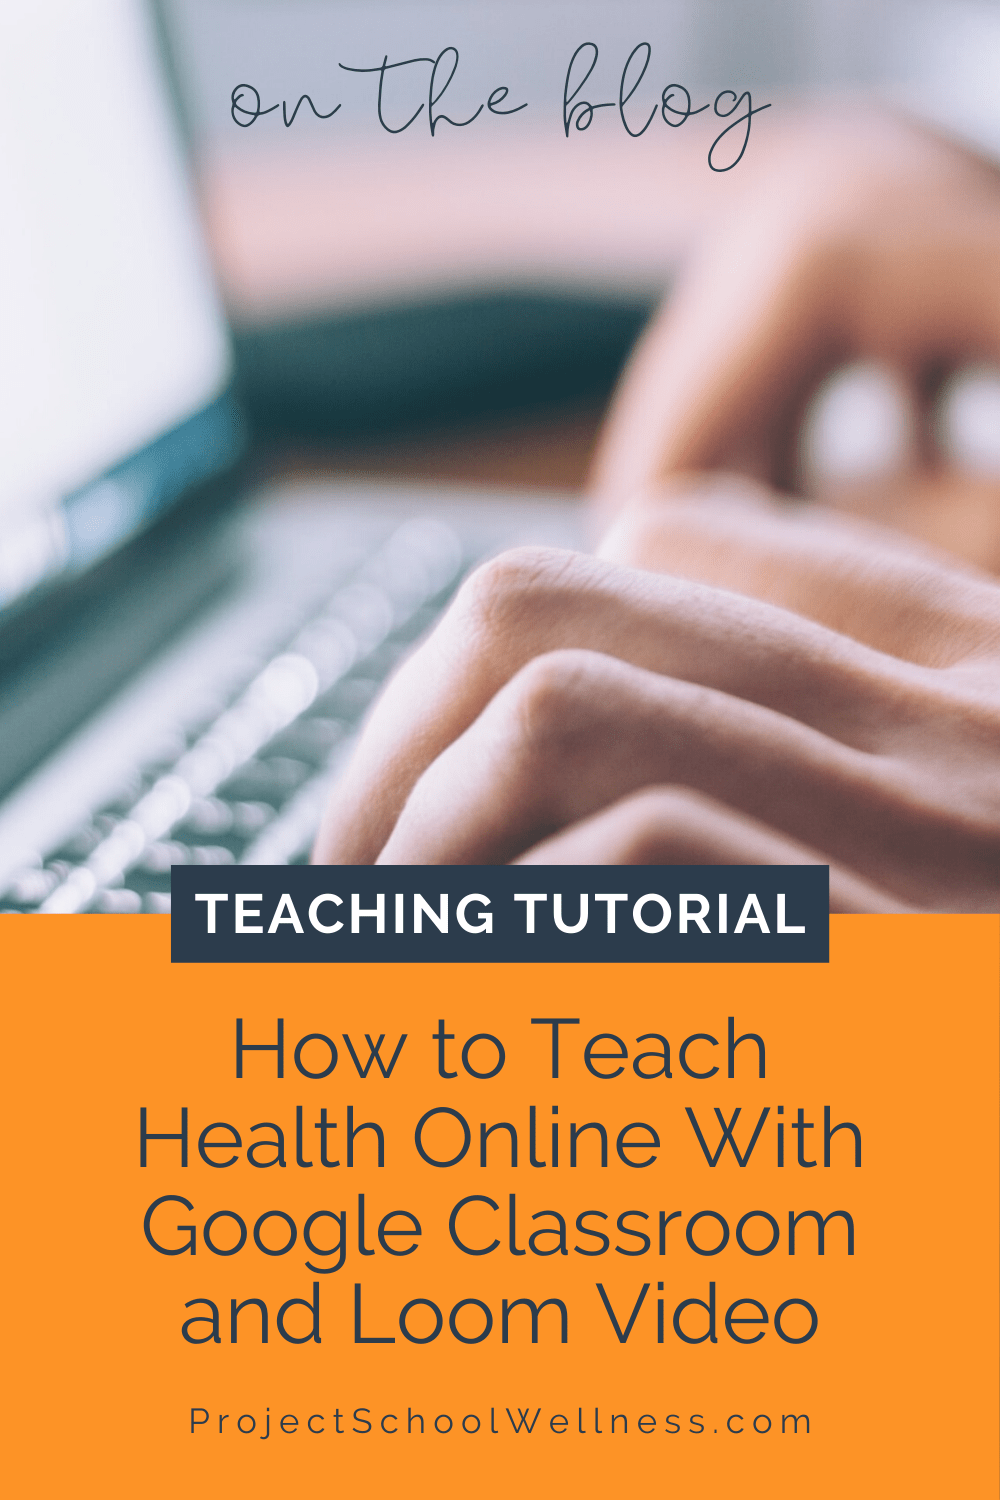 Learn how to teach health education online with Google Classroom and Loom Video with this free digital learning teaching tutorial. This health education tutorial will help middle school and high school teachers launch their digital classroom and digital learning experience. This health teacher blog post shares digital classroom ideas, digital classroom management, digital classroom design, digital learning activities for middle school Google Classroom and high school Google Classroom.